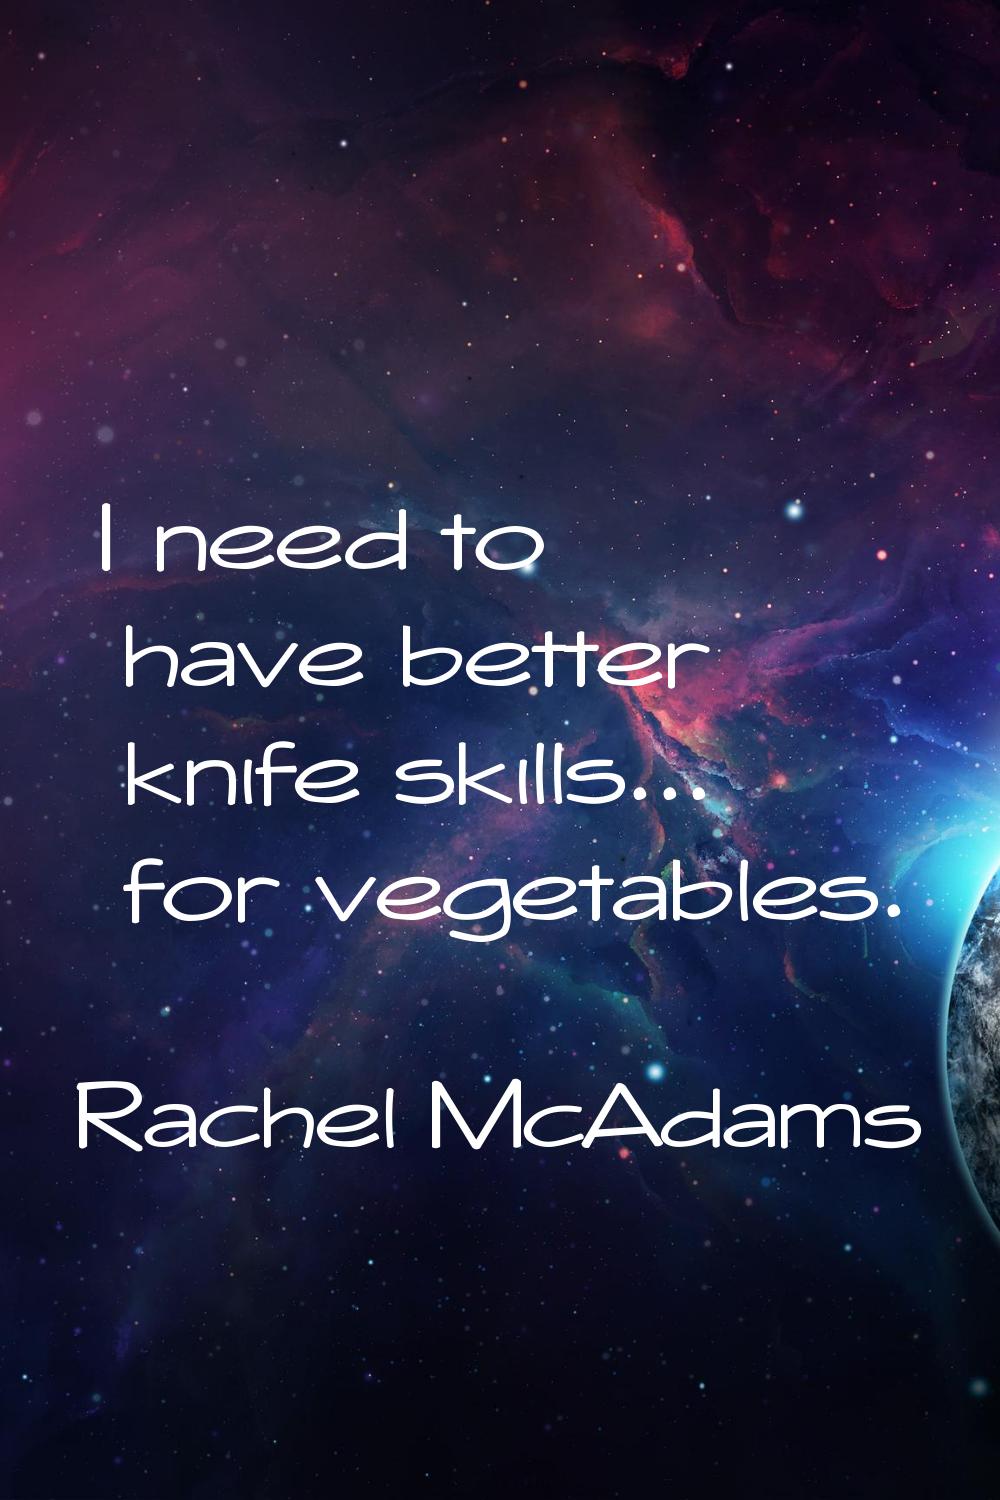 I need to have better knife skills... for vegetables.